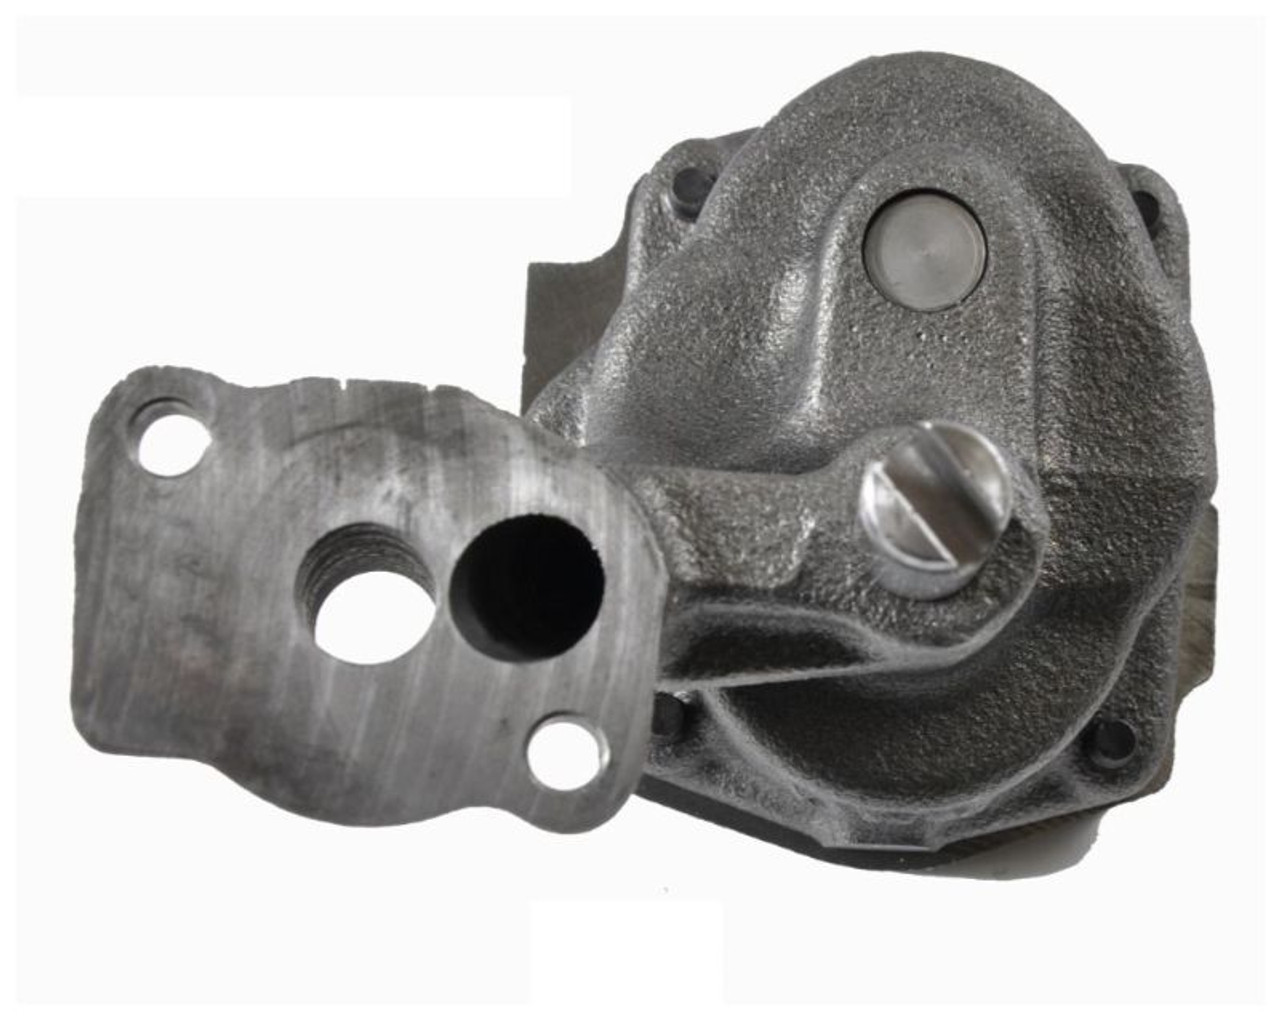 Oil Pump - 1994 Cadillac Commercial Chassis 5.7L (EP55.L3040)